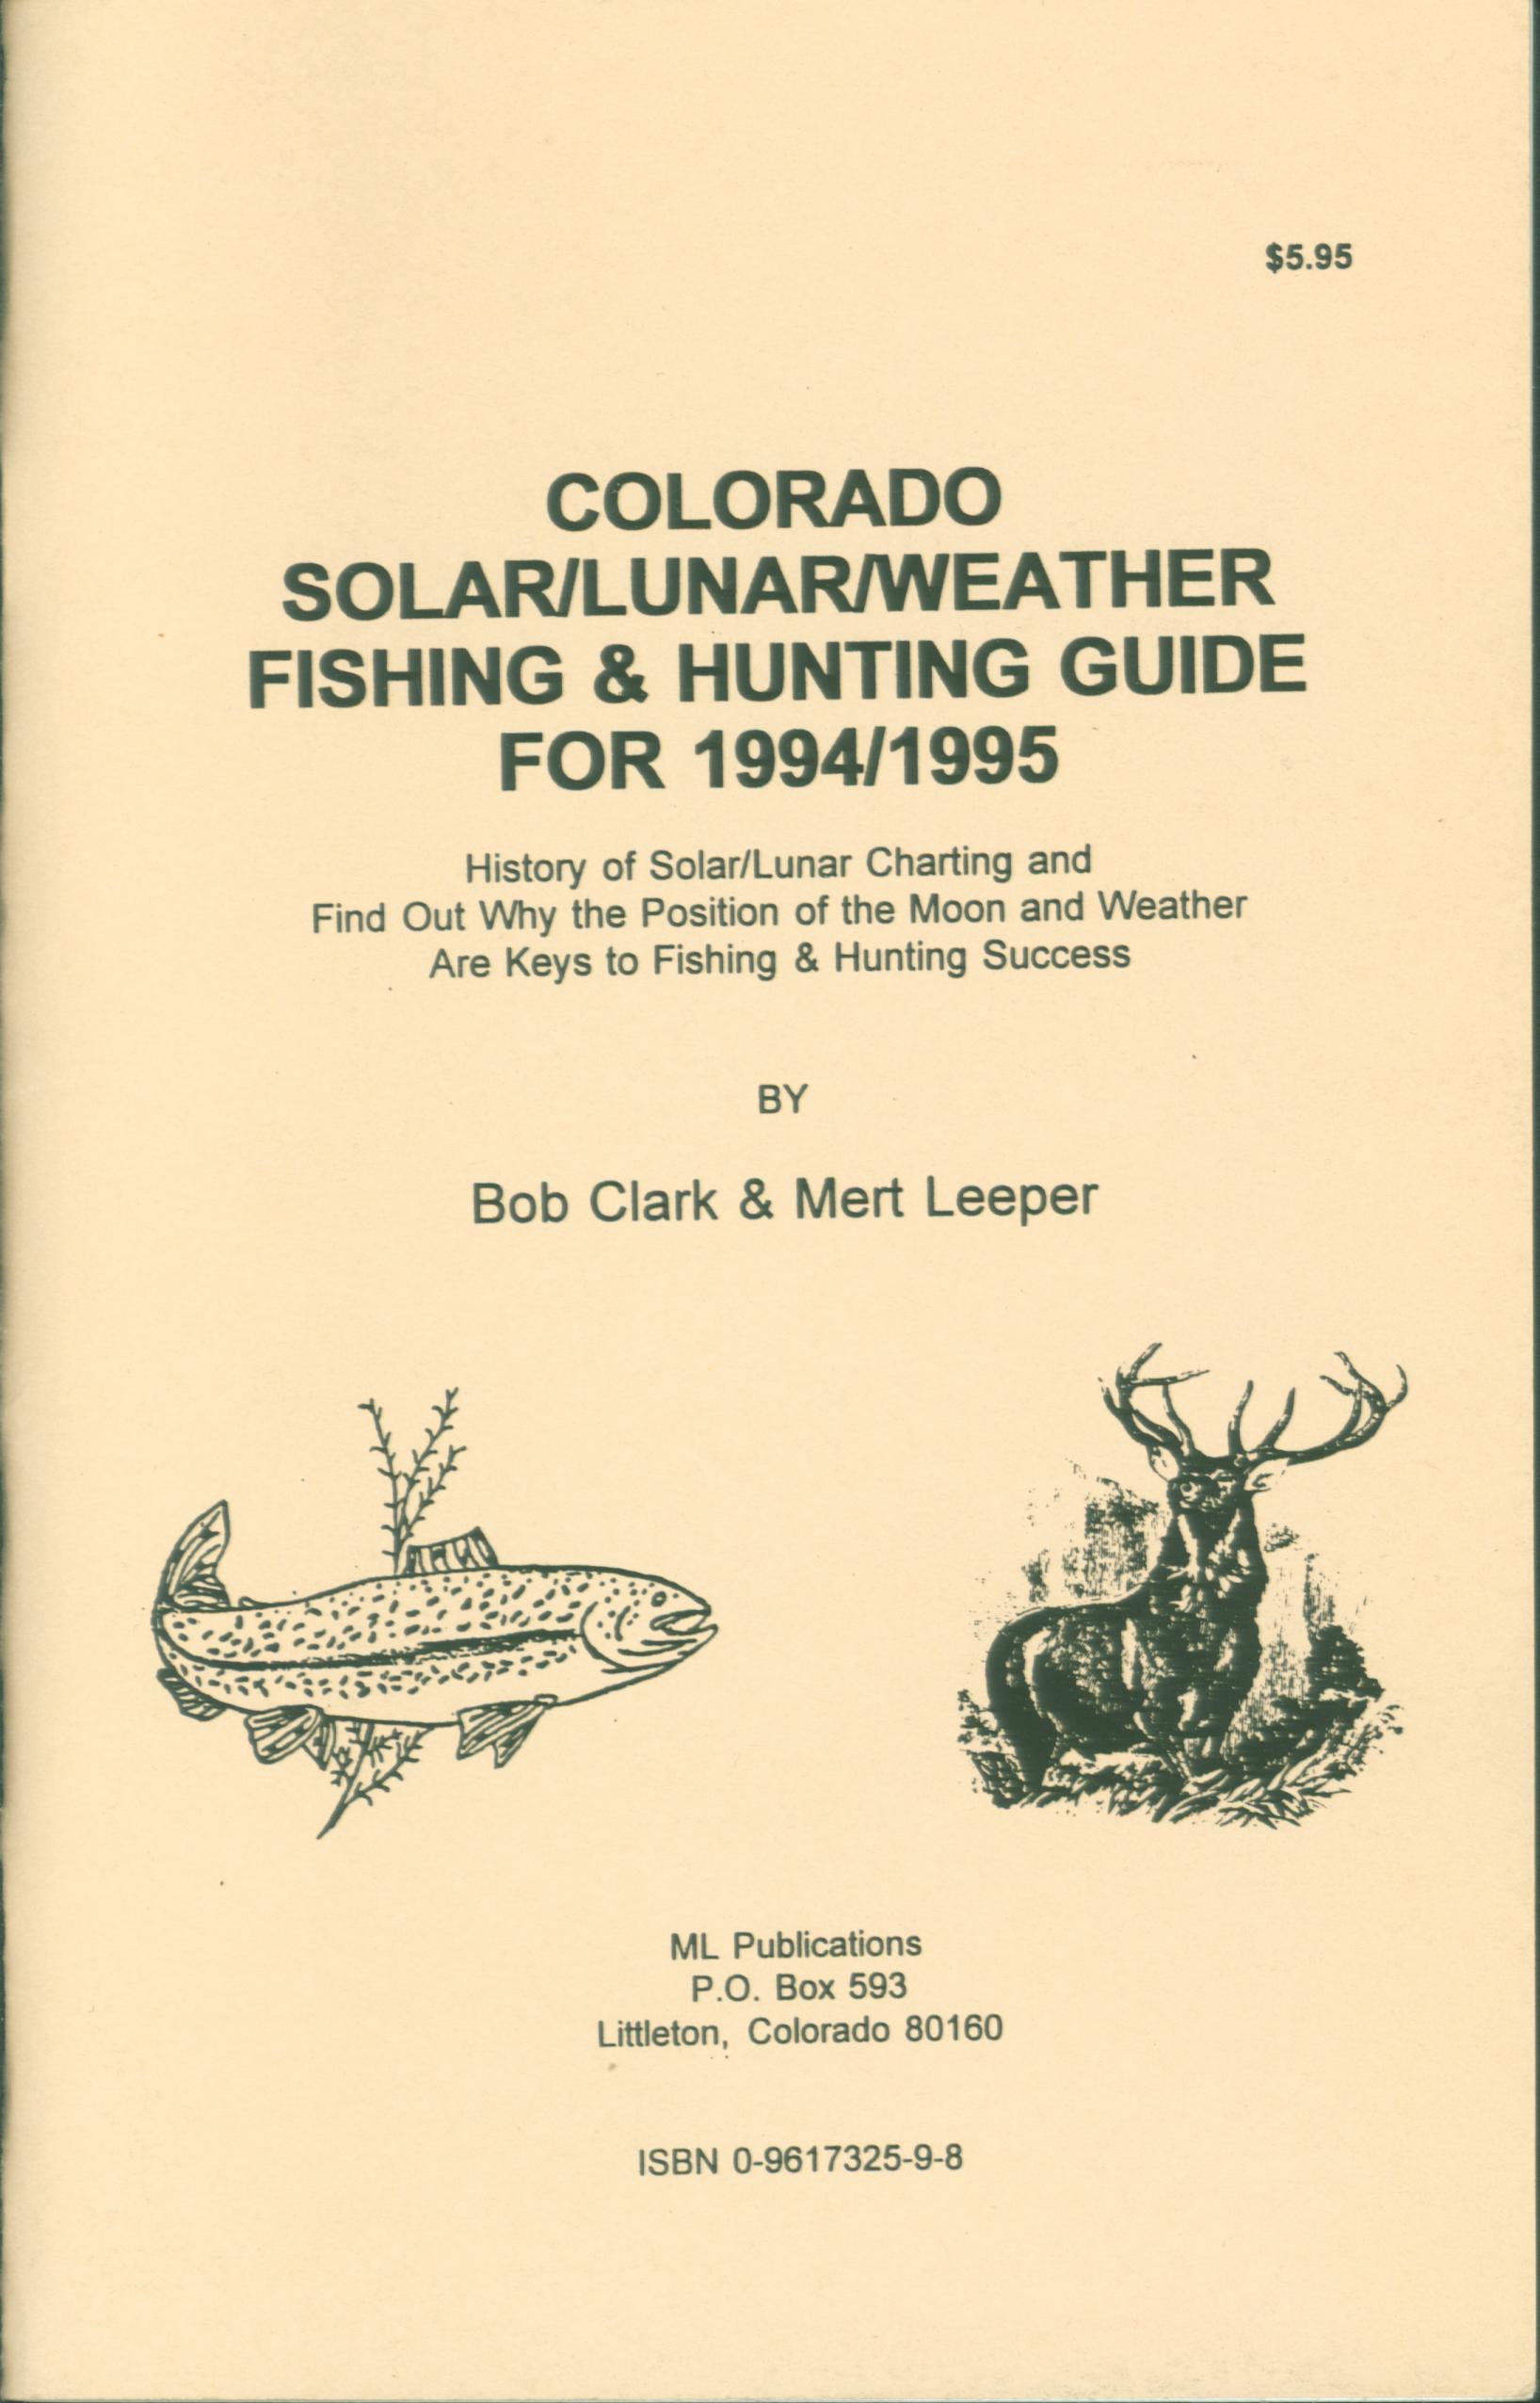 COLORADO SOLAR/LUNAR/WEATHER FISHING & HUNTING GUIDE FOR 1994-95.